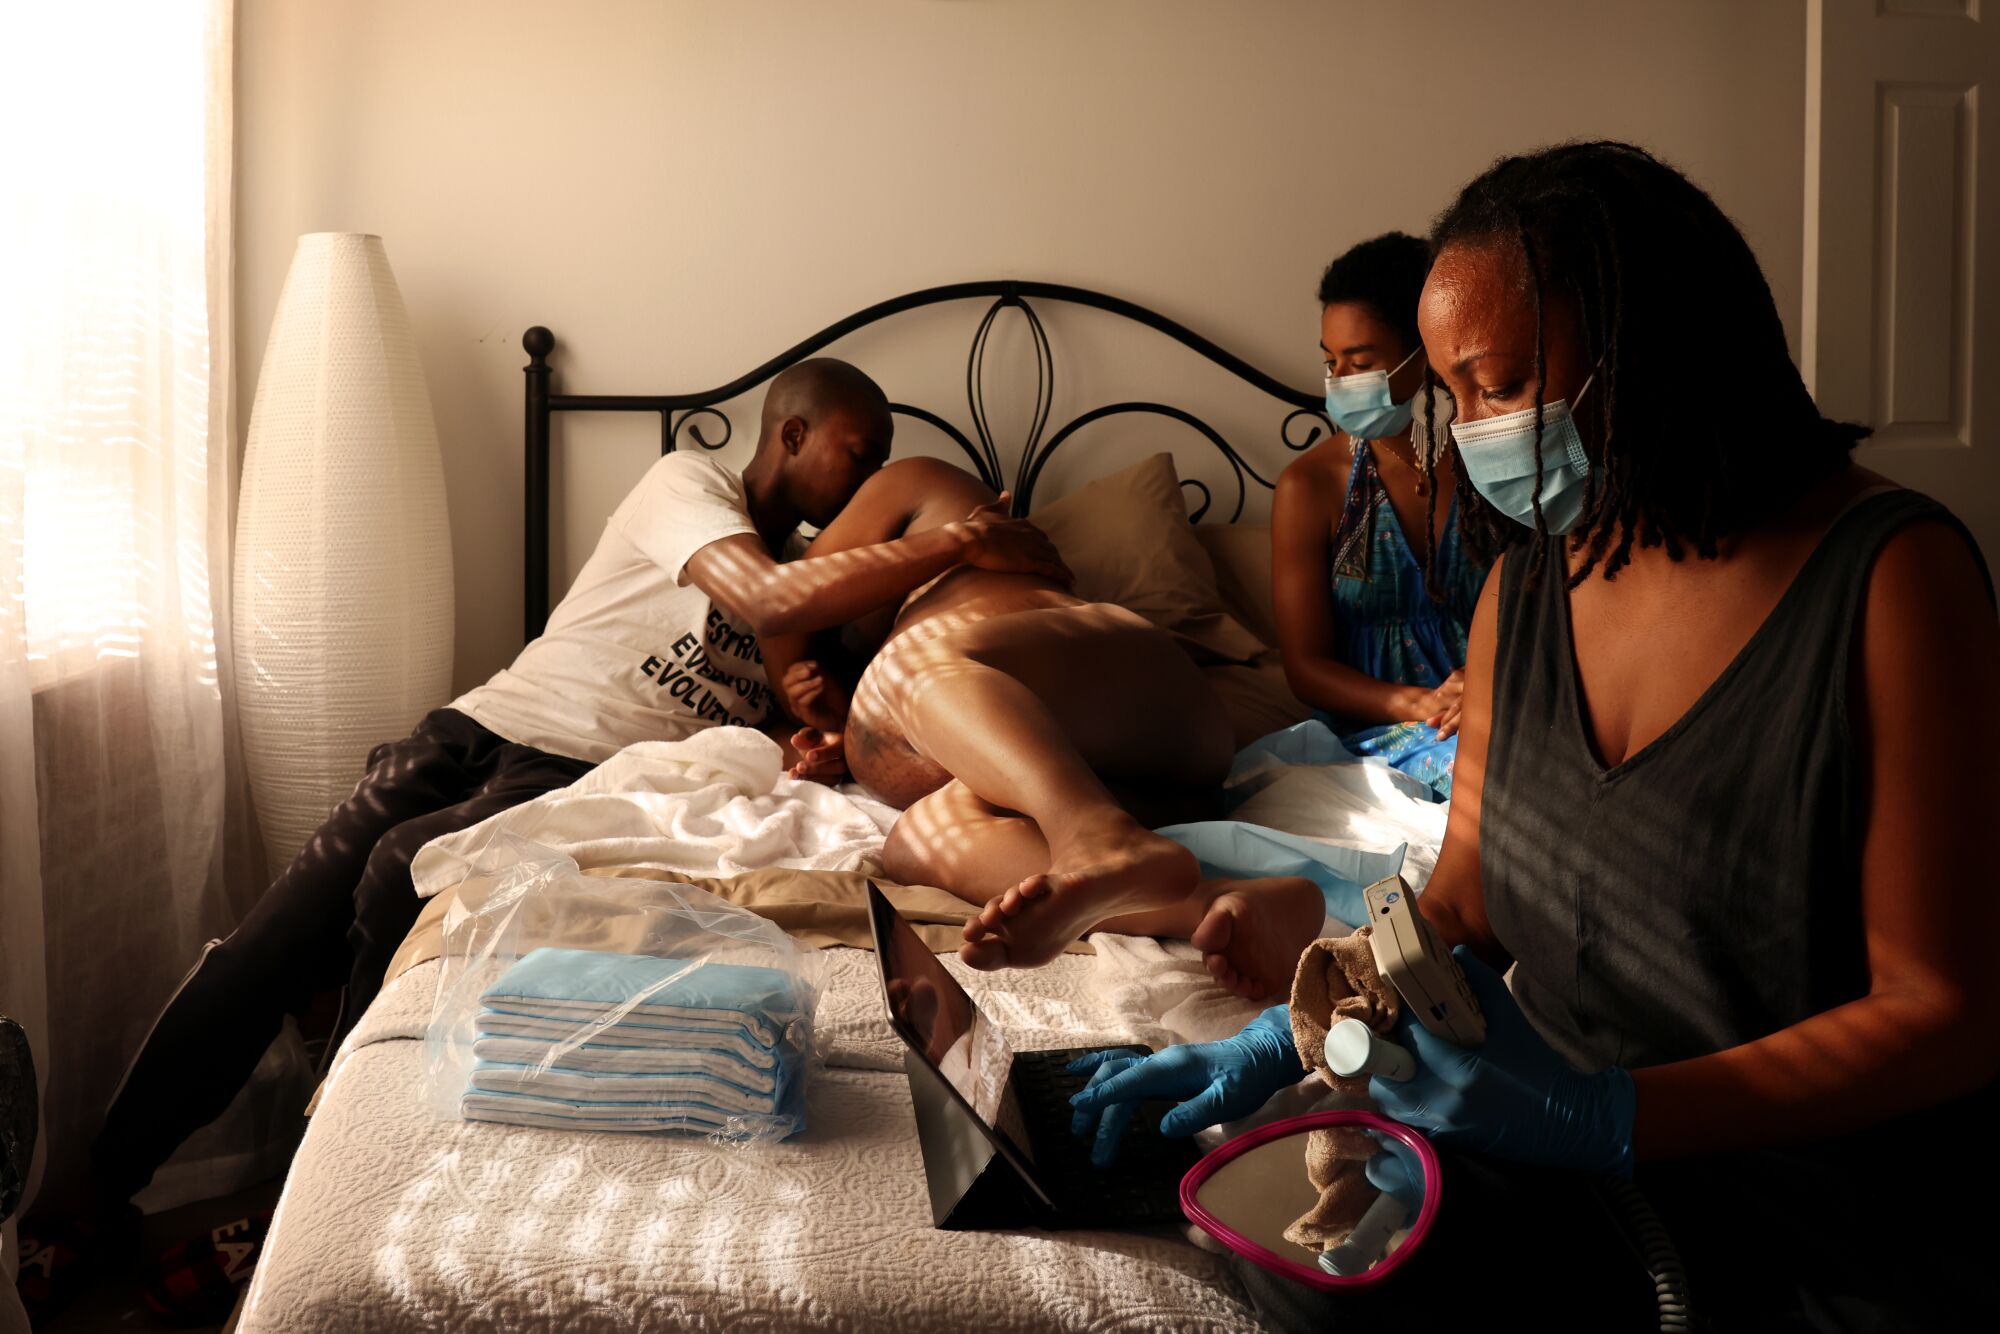 A woman in labor is comforted by her husband in a bed, alongside two other women